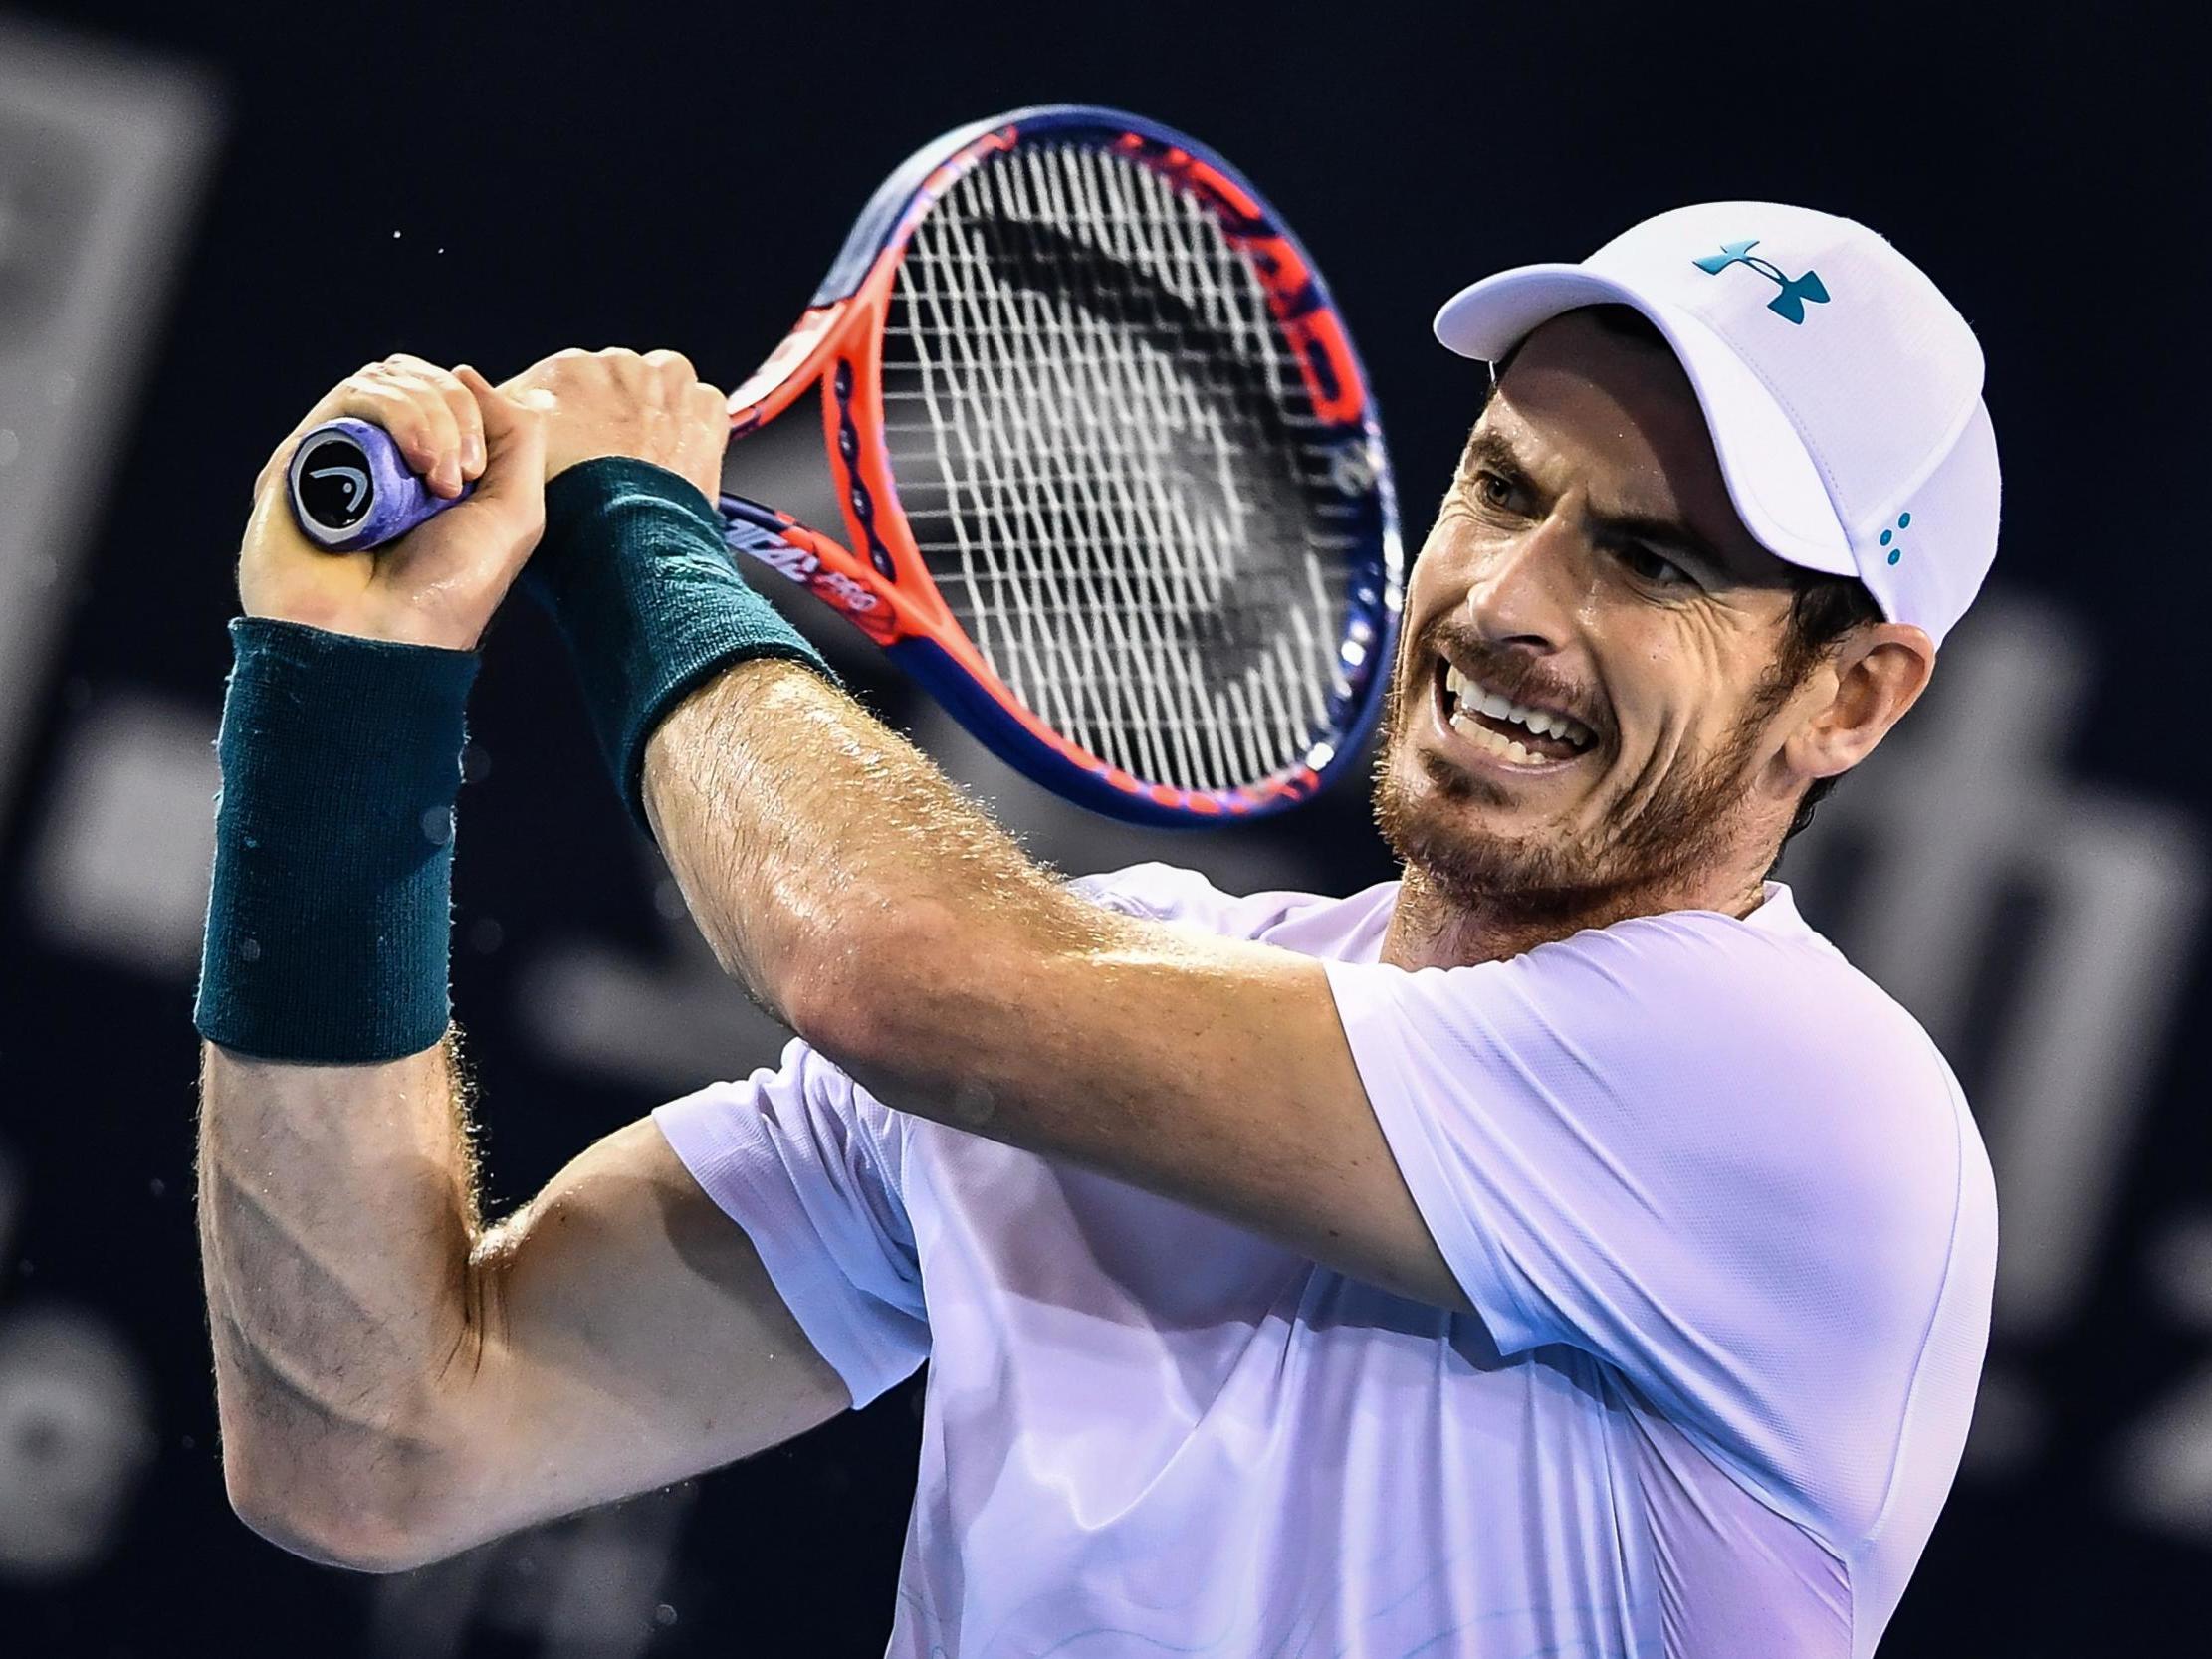 Andy Murray pulled out of the tournament citing exhaustion